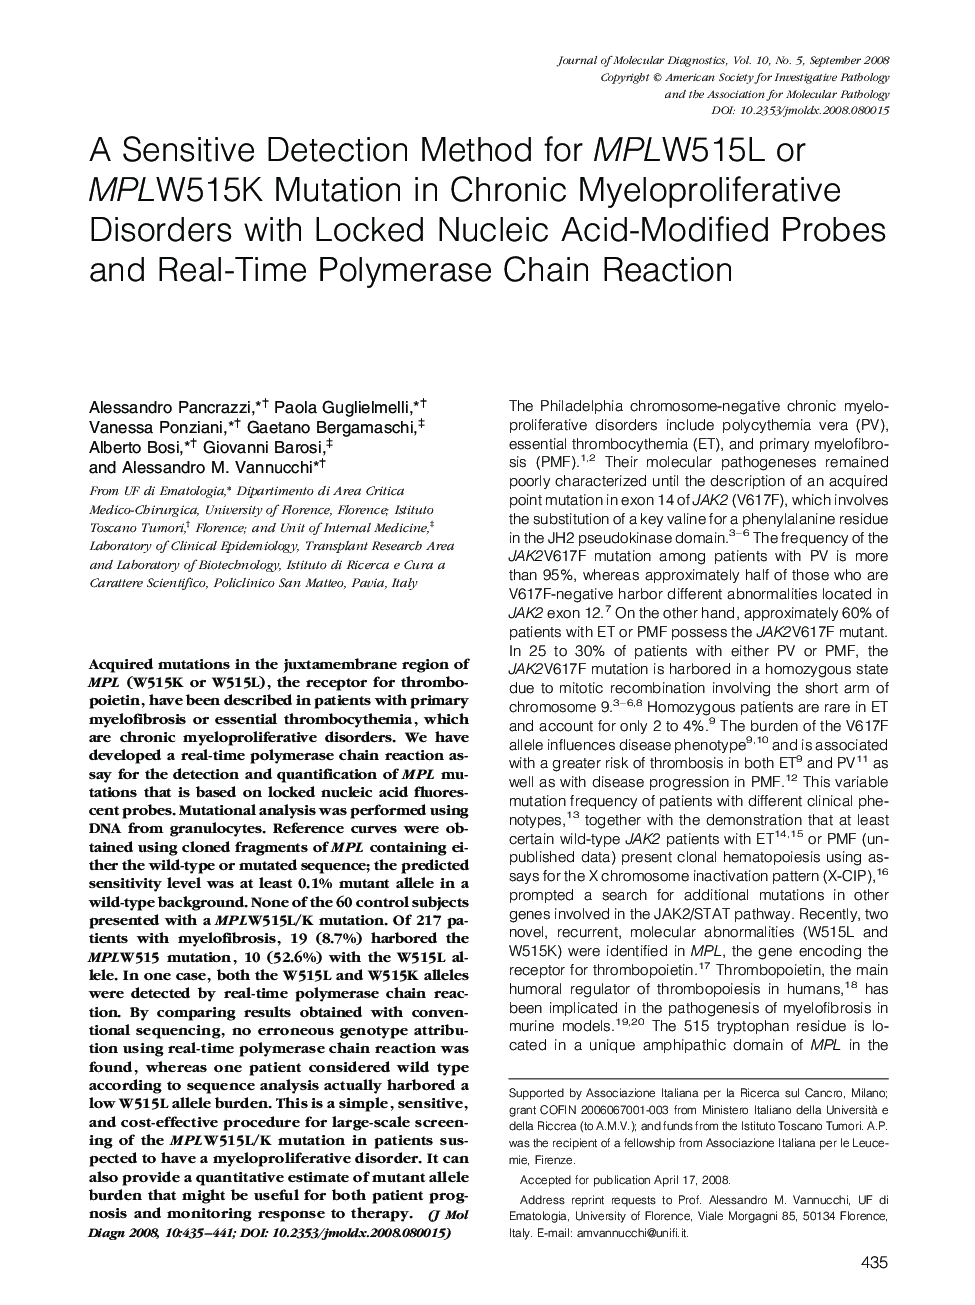 A Sensitive Detection Method for MPLW515L or MPLW515K Mutation in Chronic Myeloproliferative Disorders with Locked Nucleic Acid-Modified Probes and Real-Time Polymerase Chain Reaction 